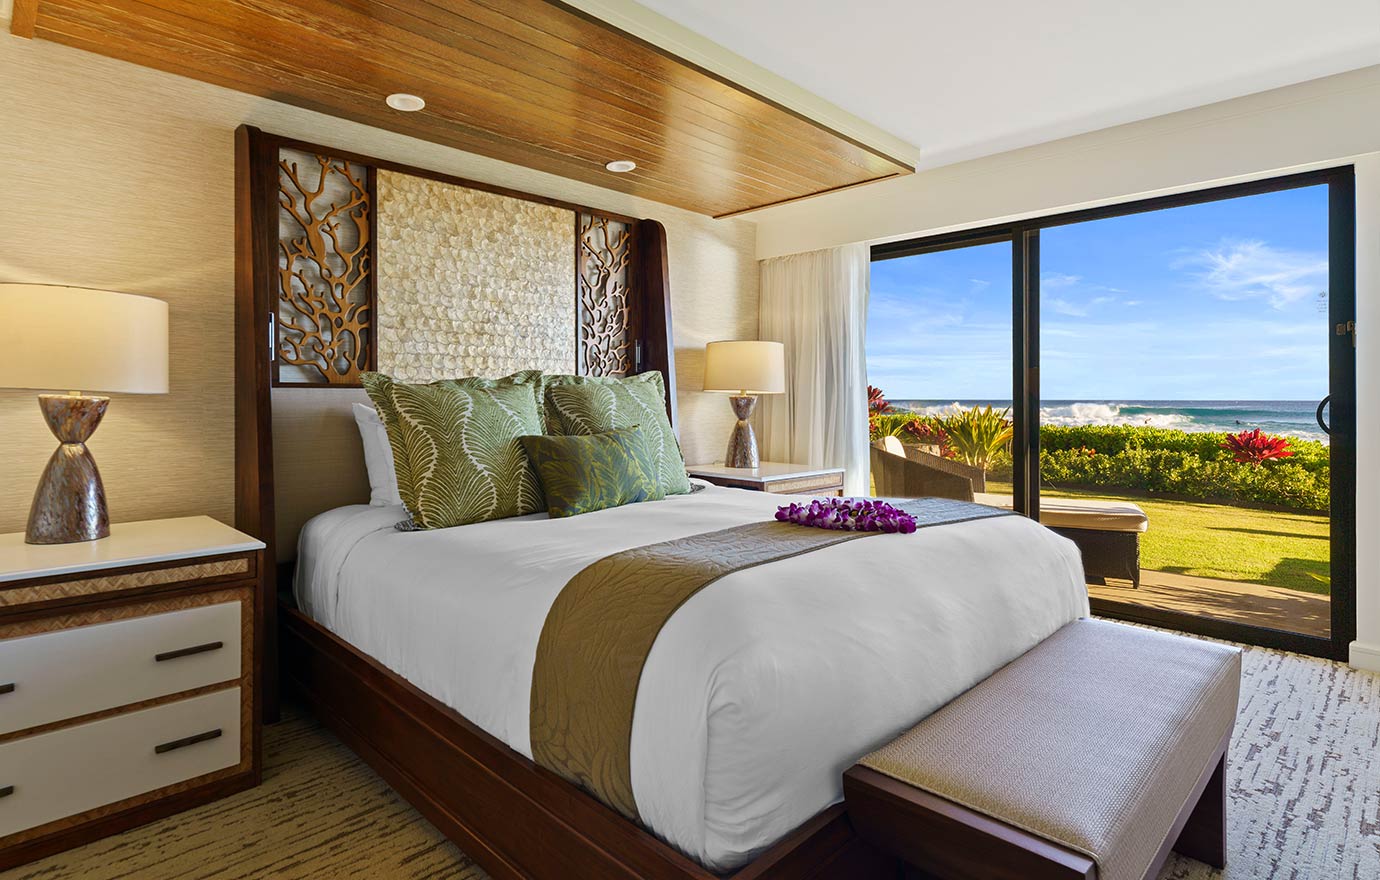 INTRODUCING REIMAGINED GUEST ROOMS